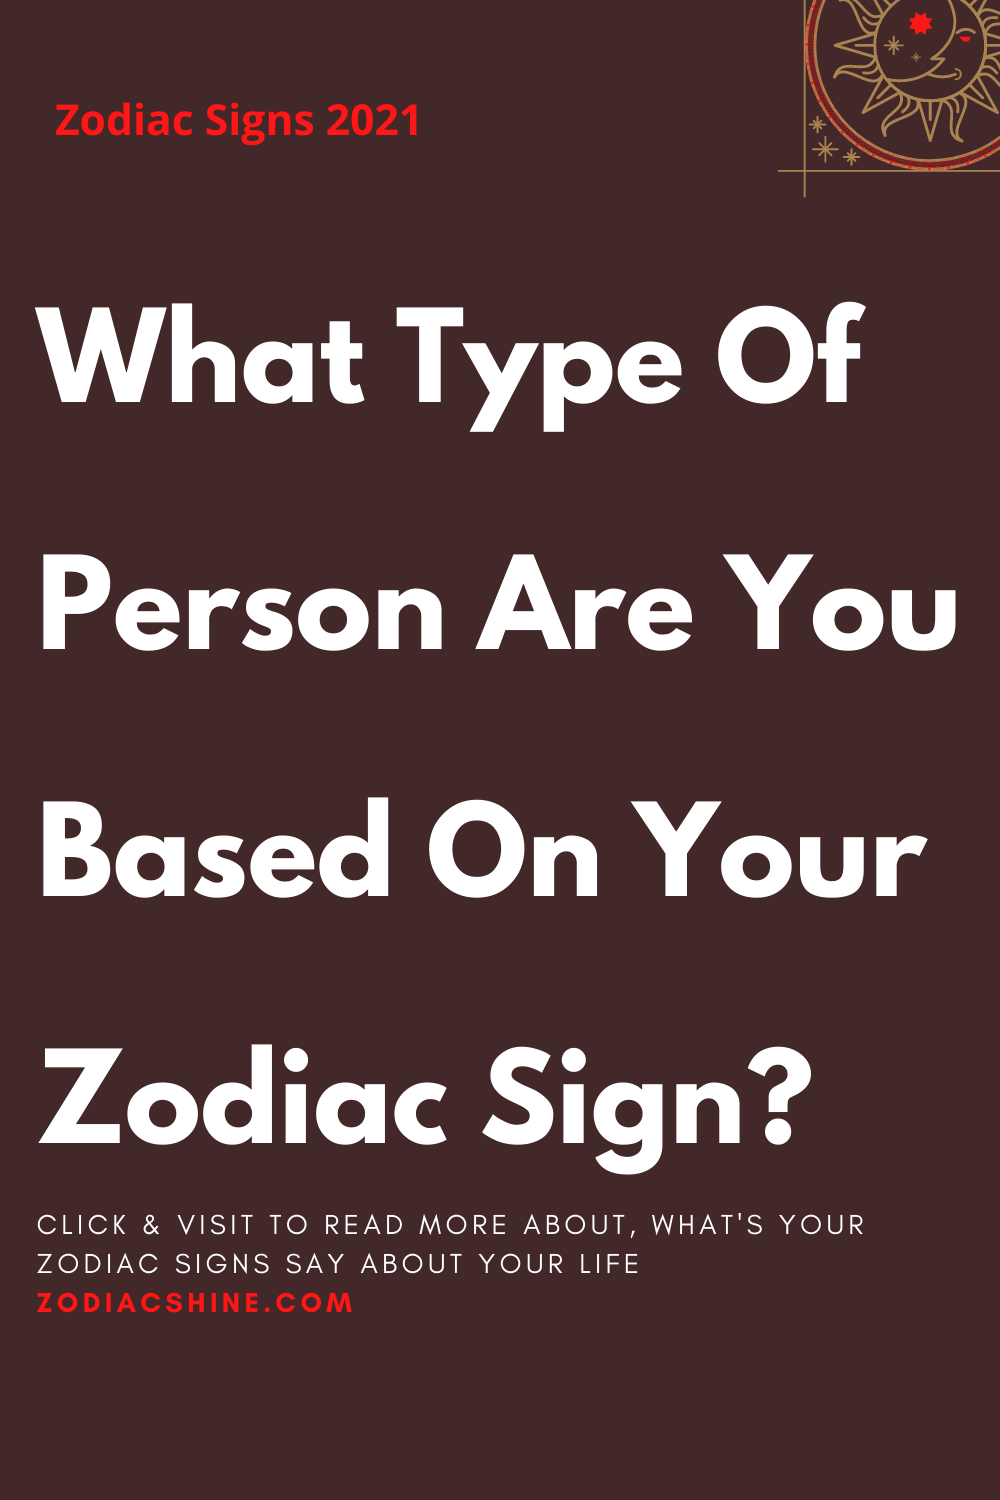 What Type Of Person Are You Based On Your Zodiac Sign?